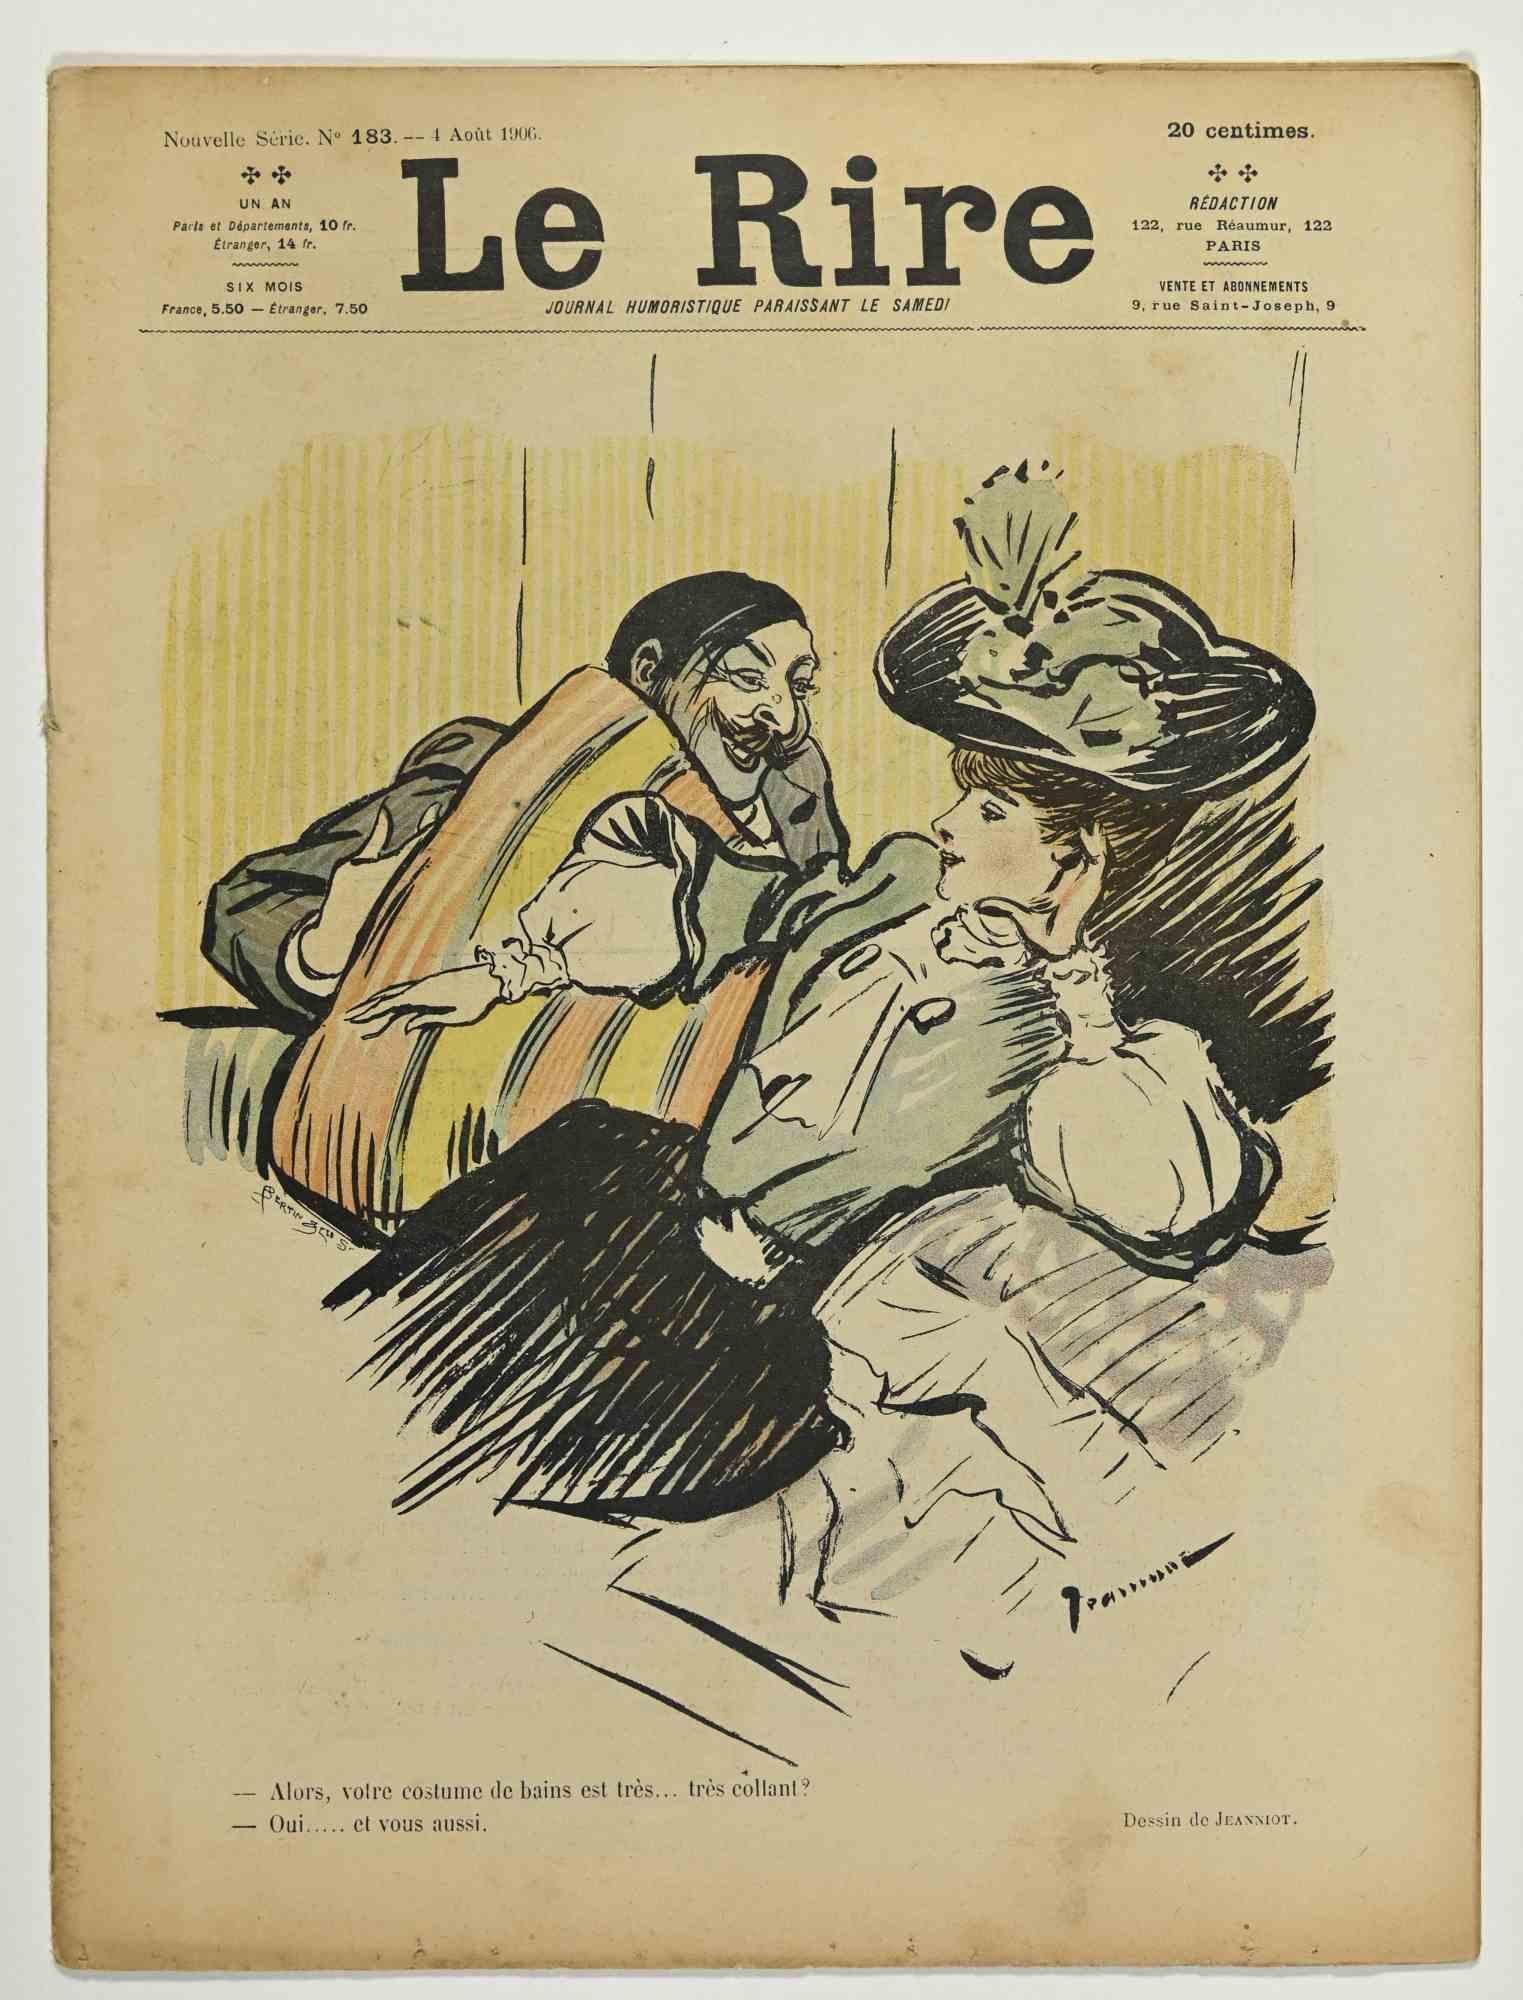 Le Rire is a Comic Magazine published in june 1906, reproducing  in lithographs the drawings by Pierre-Georges Jeanniot (1848–1934).
